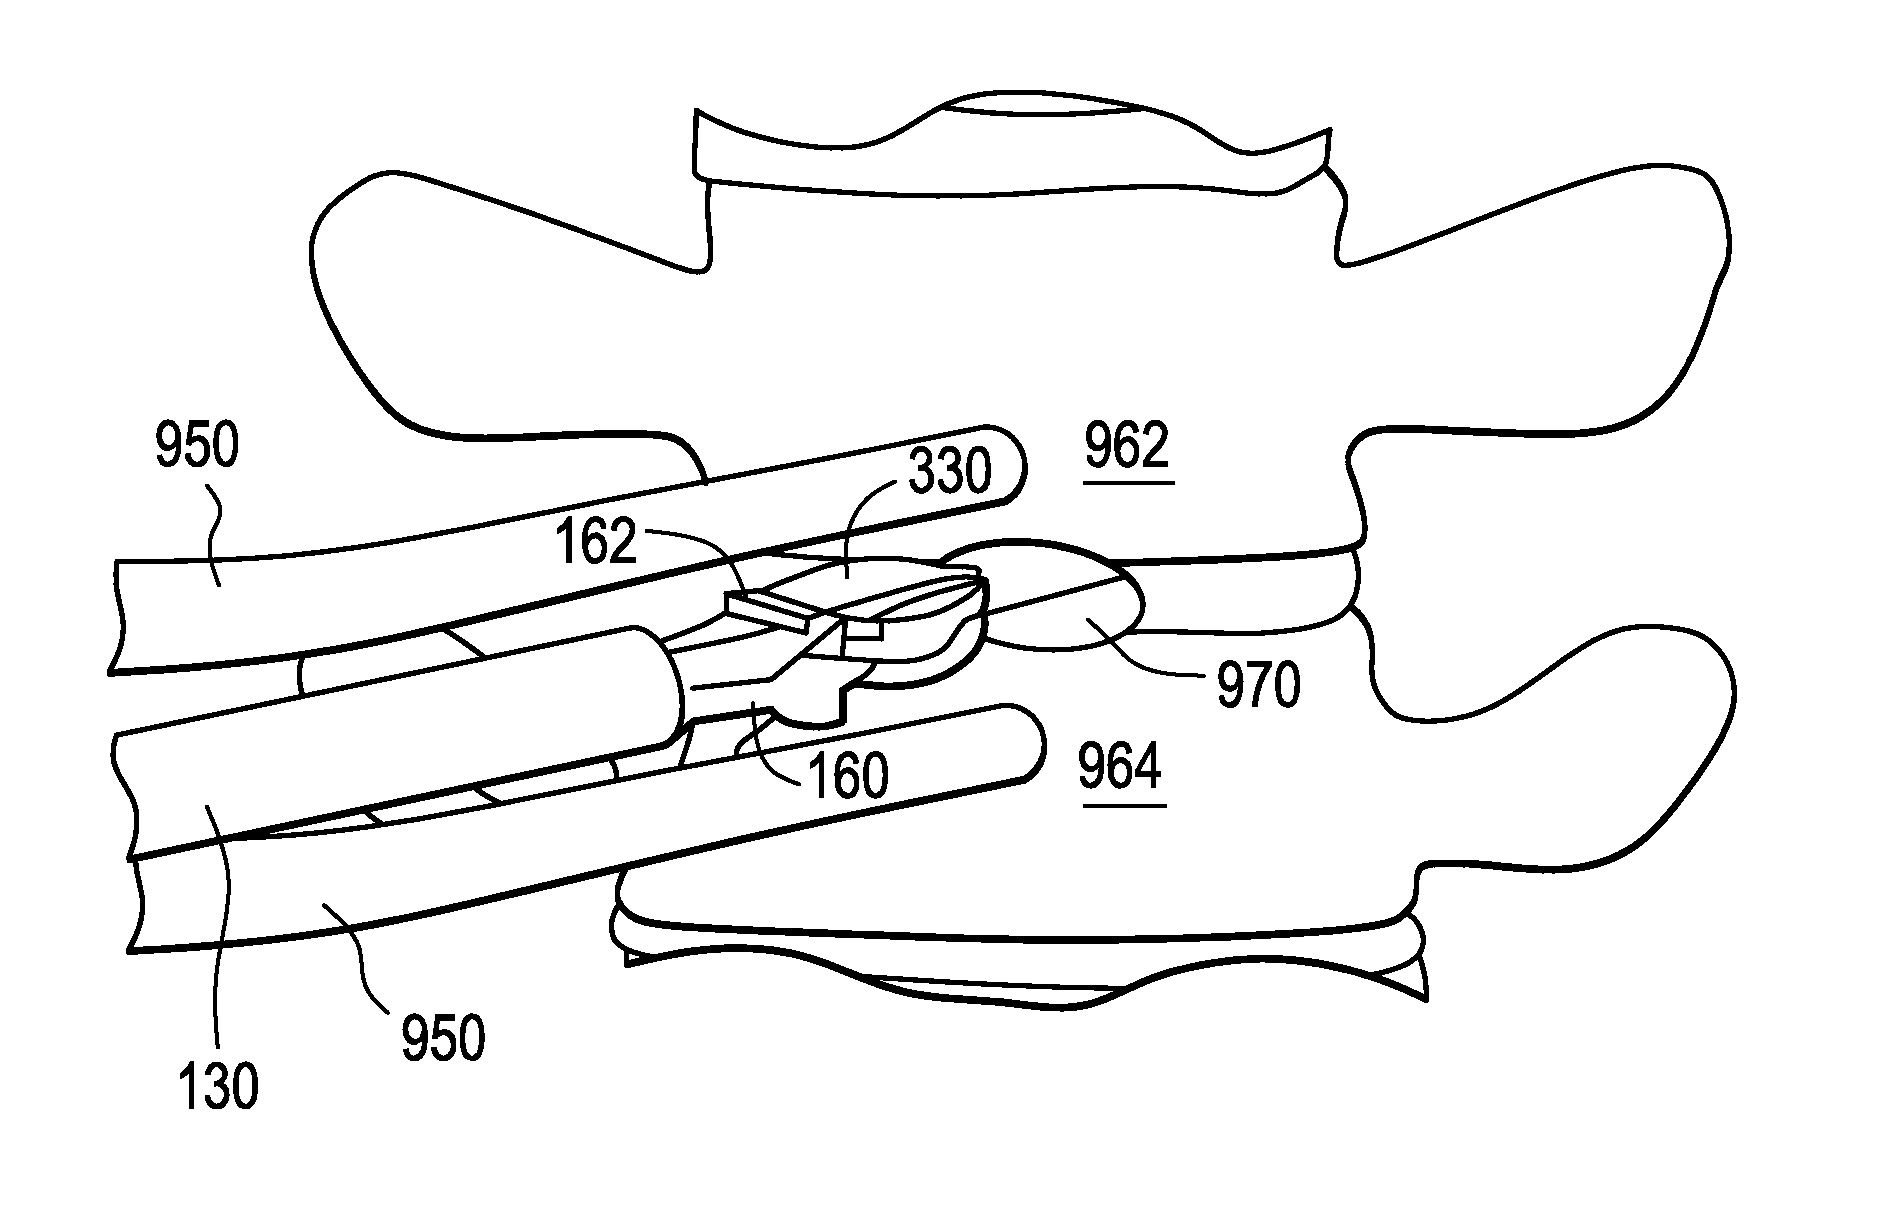 Novel Implant Inserter Having a Laterally-Extending Dovetail Engagement Feature